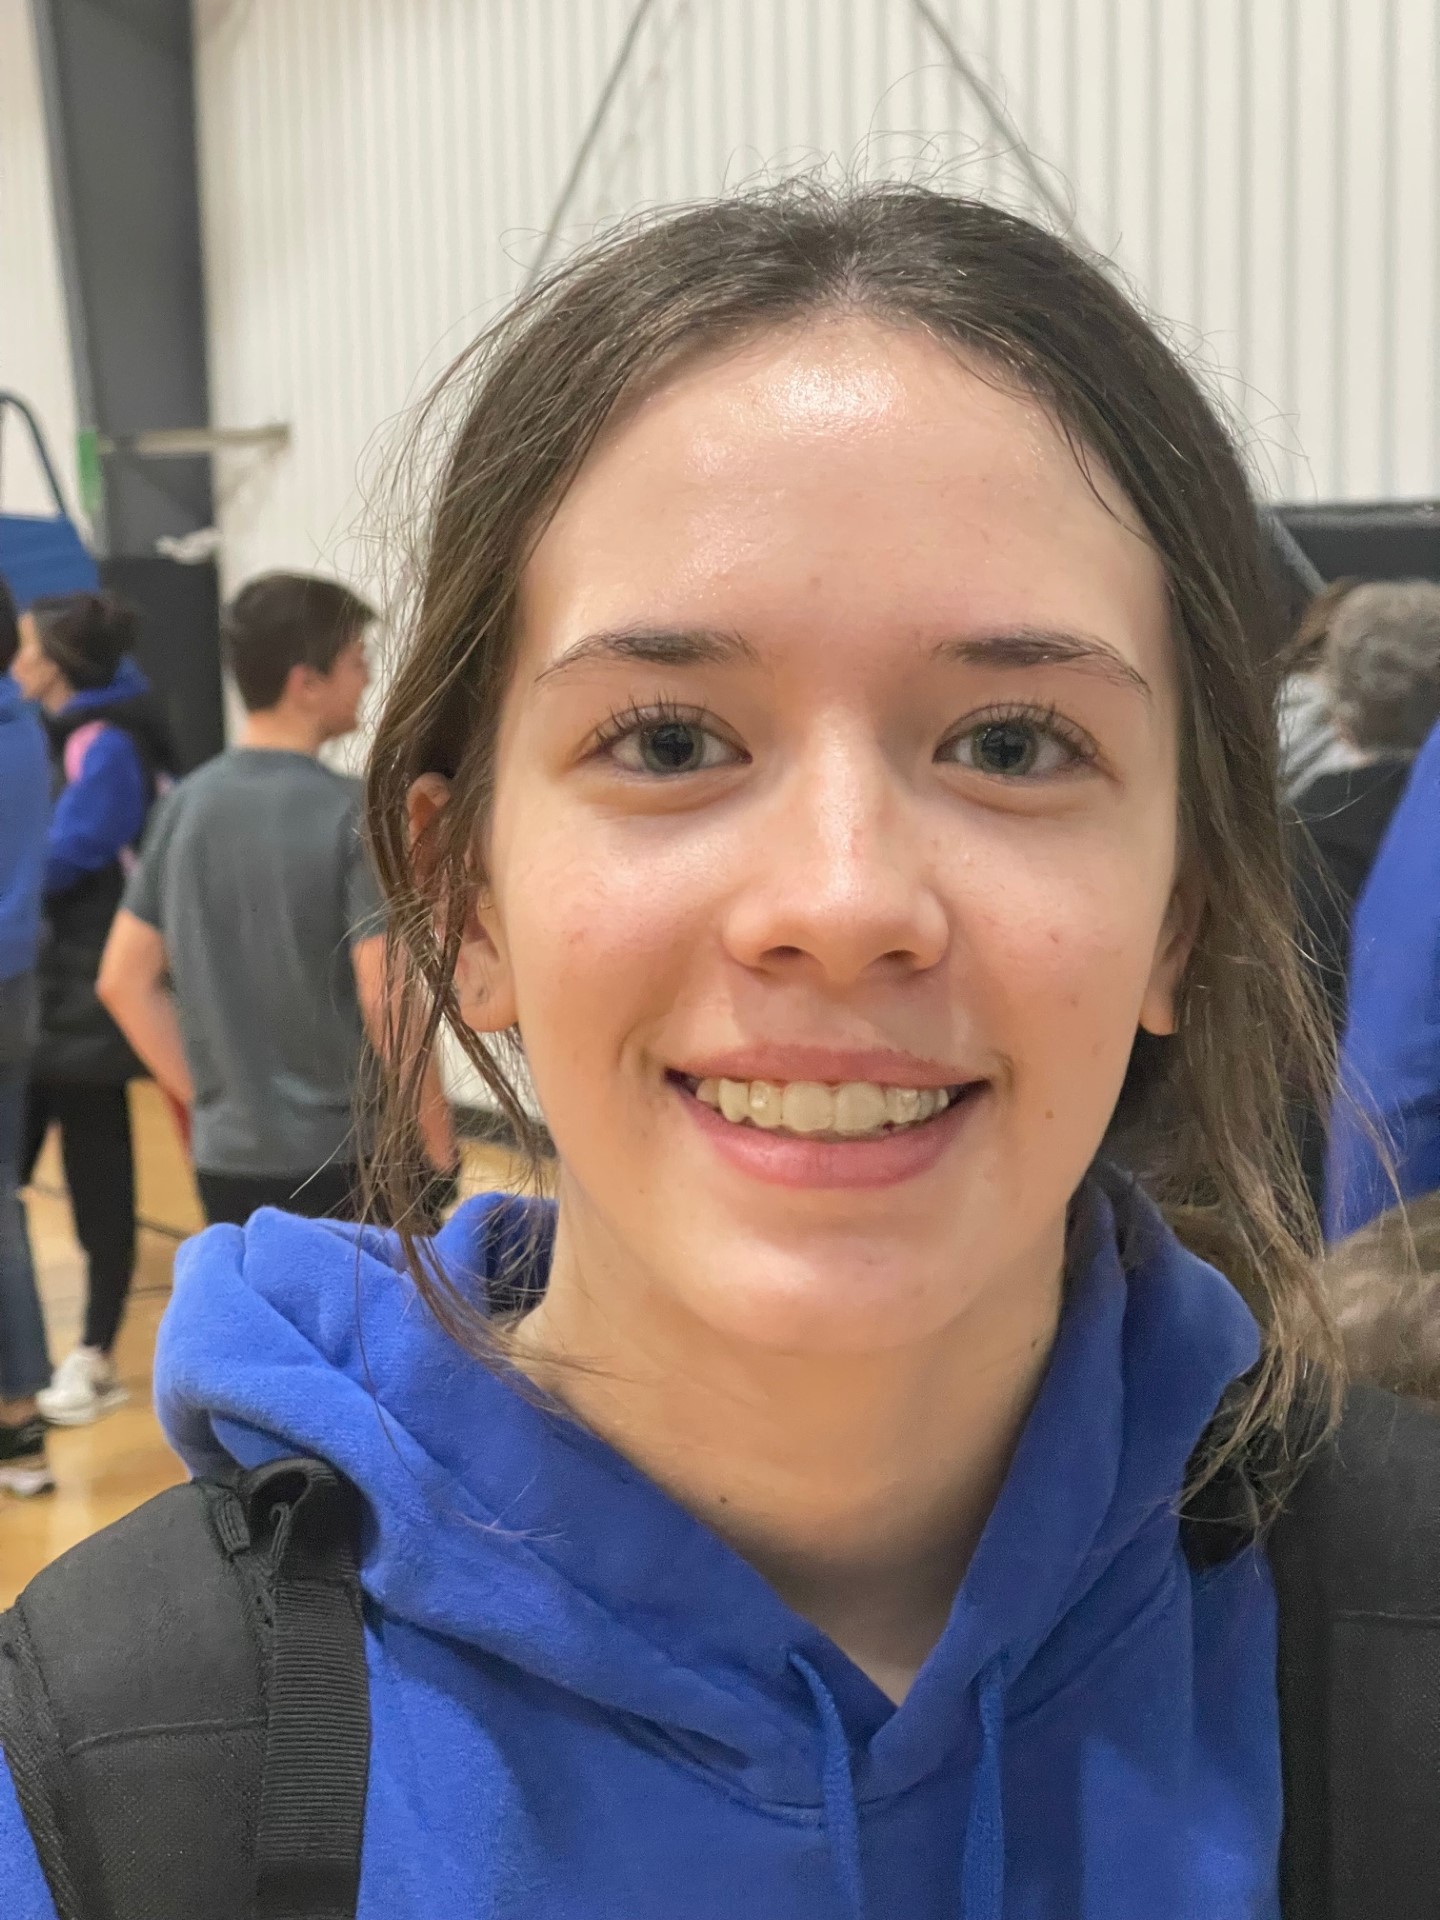 <span class="pn-tooltip pn-player-link">
        <span class="name-pointer">15-Under standouts at Pioneer Region Tournament</span>
        <span class="info-box not-prose" style="background: linear-gradient(to bottom, rgba(23,90,170, 0.95) 0%,rgba(23,90,170, 1) 100%)">
            <a href="https://prepdig.com/2024/03/15-under-standouts-at-pioneer-region-tournament/" class="link-wrap">
                                    <span class="player-img"><img src="https://prepdig.com/wp-content/uploads/sites/5/2024/02/15Under.jpg?w=150&h=150&crop=1" alt="15-Under standouts at Pioneer Region Tournament"></span>
                
                <span class="player-details">
                    <span class="first-name">15-Under</span>
                    <span class="last-name">standouts at Pioneer Region Tournament</span>
                    <span class="measurables">
                                            </span>
                                    </span>
                <span class="player-rank">
                                                        </span>
                                    <span class="state-abbr"></span>
                            </a>

            
        </span>
    </span>
